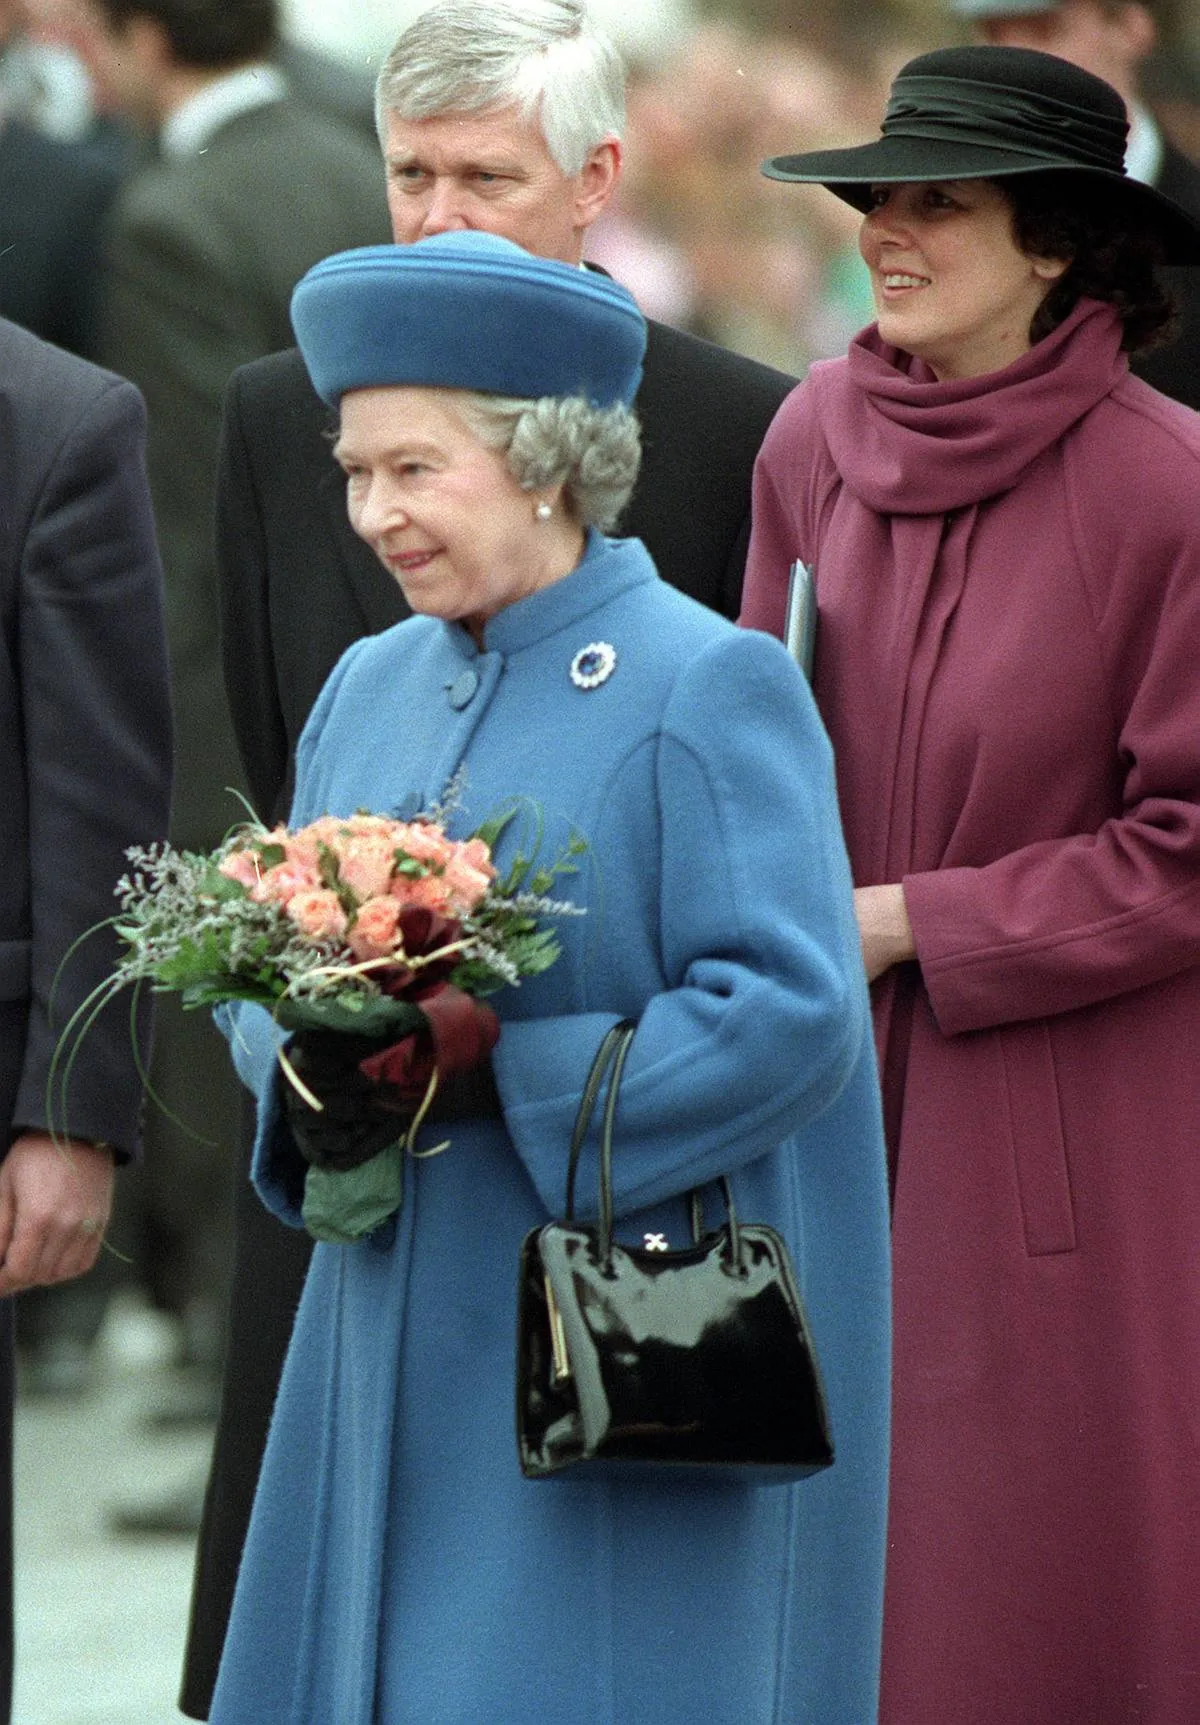 <p><a href="https://www.thecourtjeweller.com/2016/09/queen-elizabeths-sapphire-brooches.html" rel="noopener noreferrer">The Albert Brooch</a> is said to have been one of the Queen's most treasured pieces of jewelry. It was a gift presented to her great-great-grandmother Queen Victoria by her fiance Prince Albert the day before they were wed.</p> <p>Victoria admired the brooch so much that she wore it many times after her wedding day. </p>